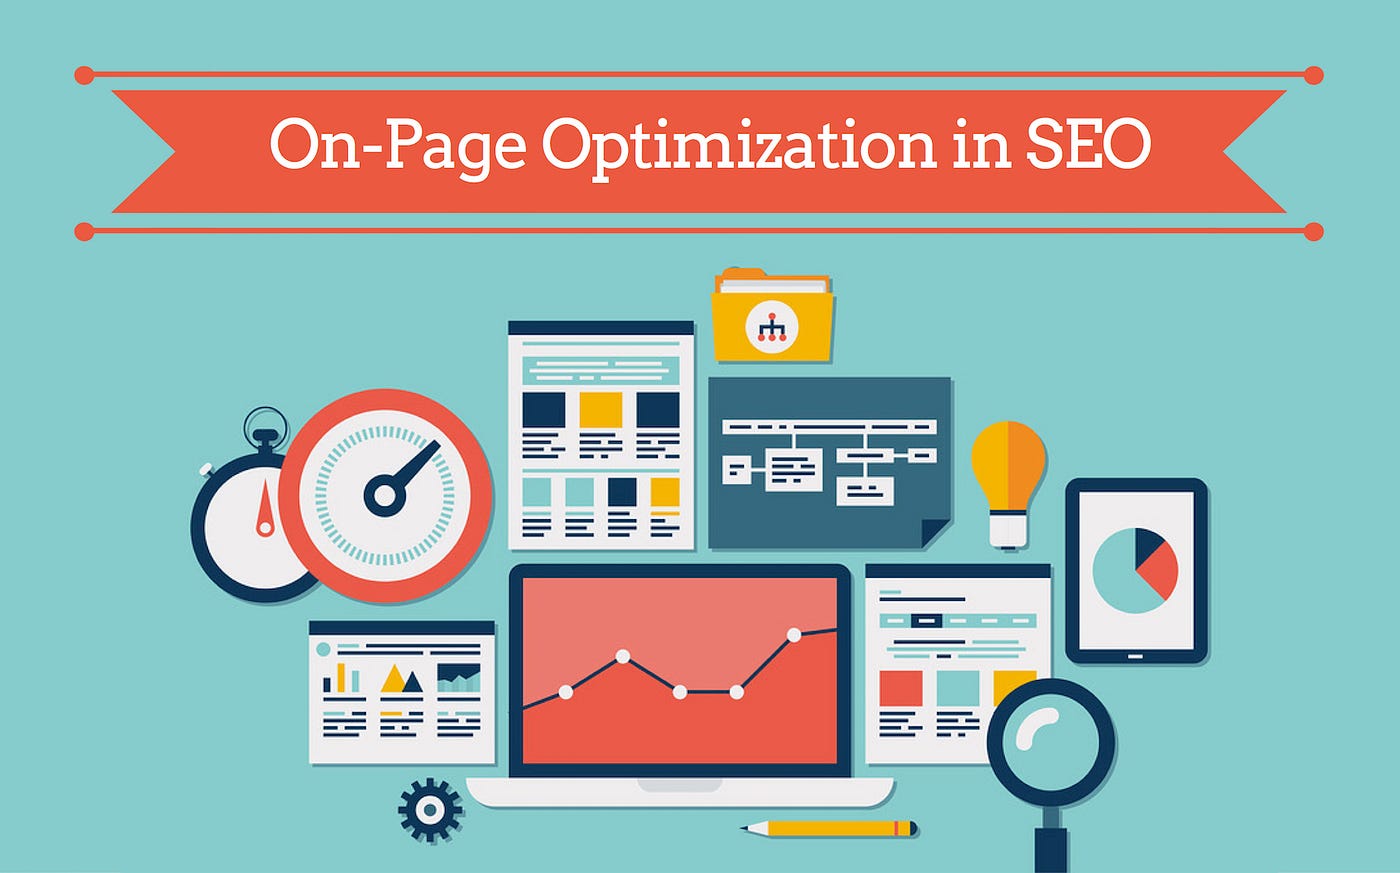 On-Page Optimization in SEO